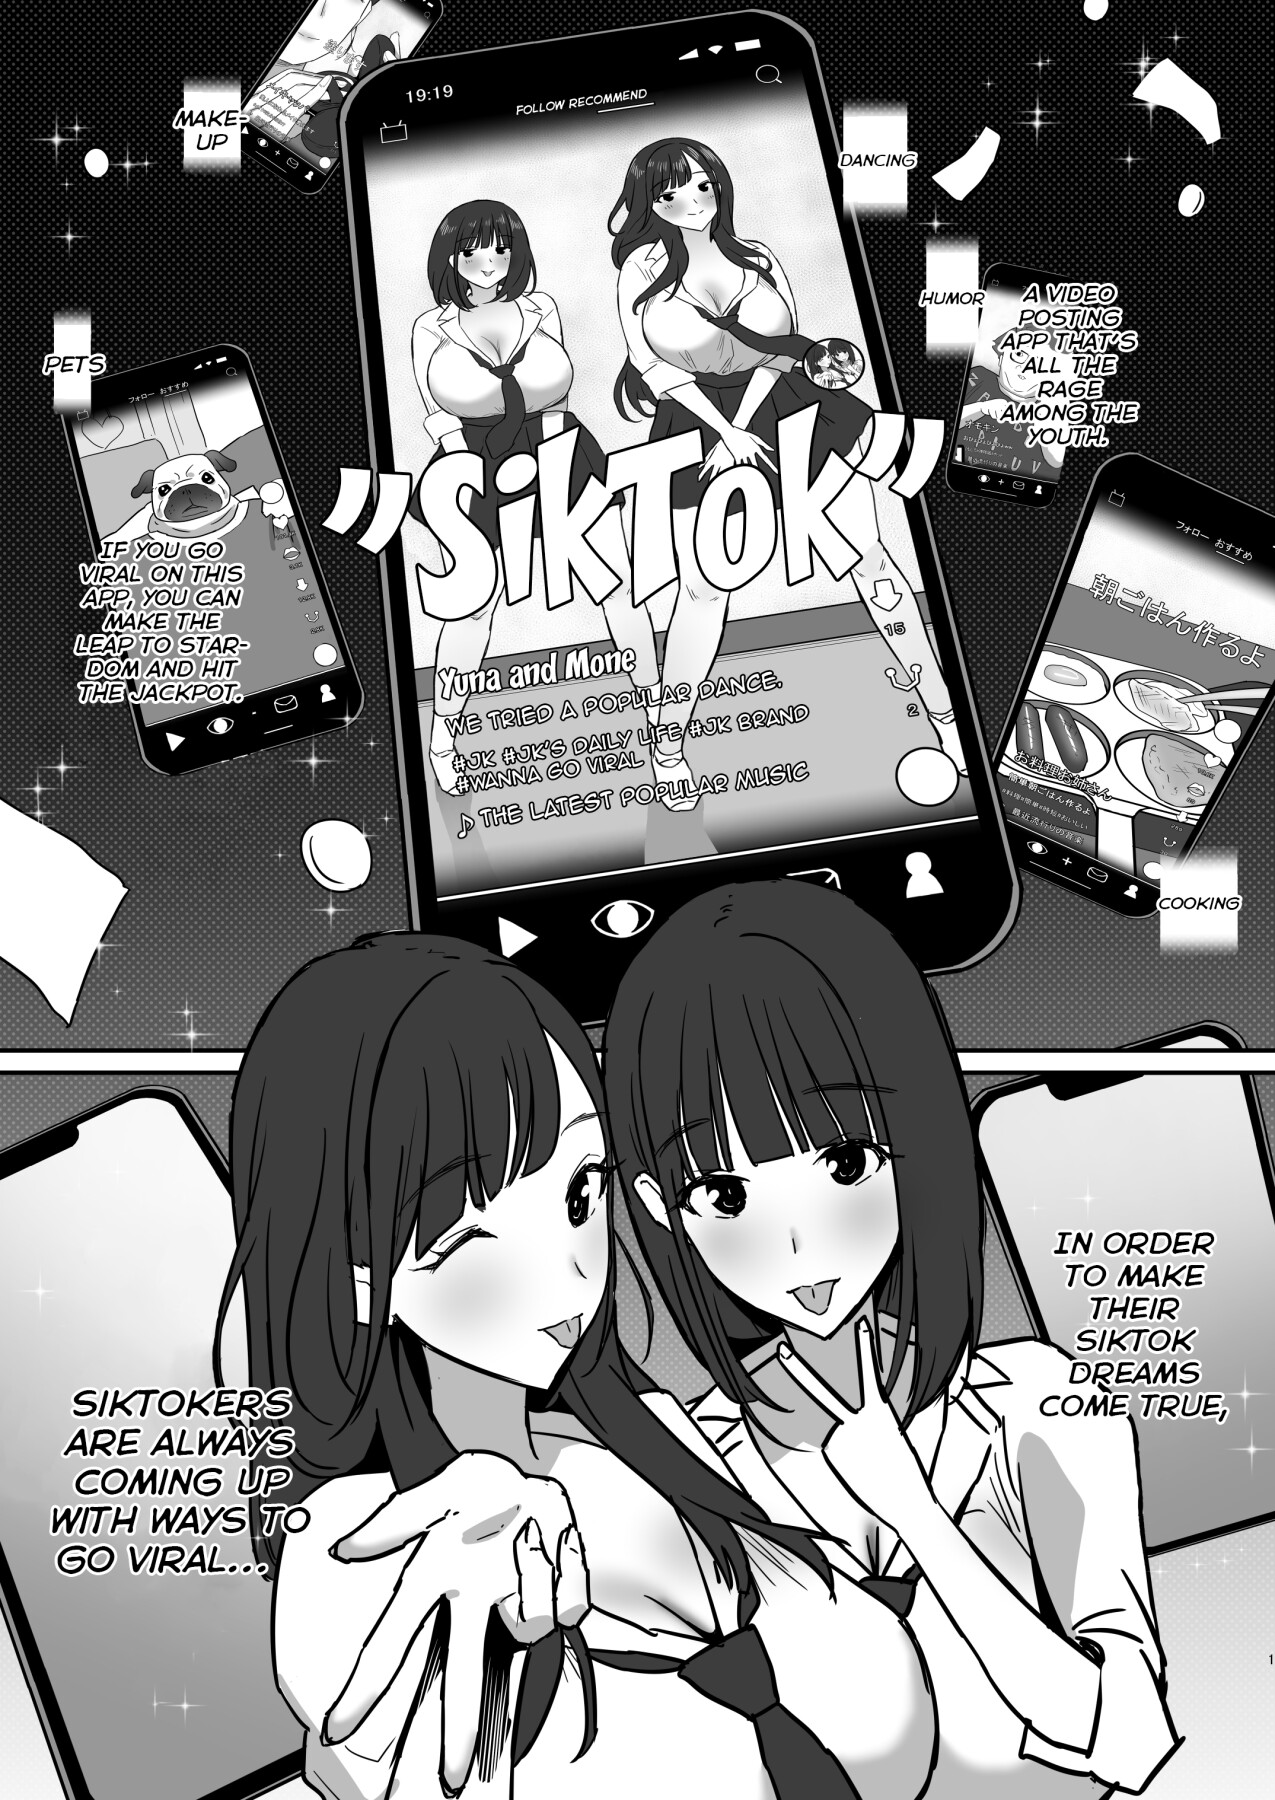 Hentai Manga Comic-The Book where a Kid gets Titfucked a lot by Onee-chan's JK *iktoker Friends.-Read-2